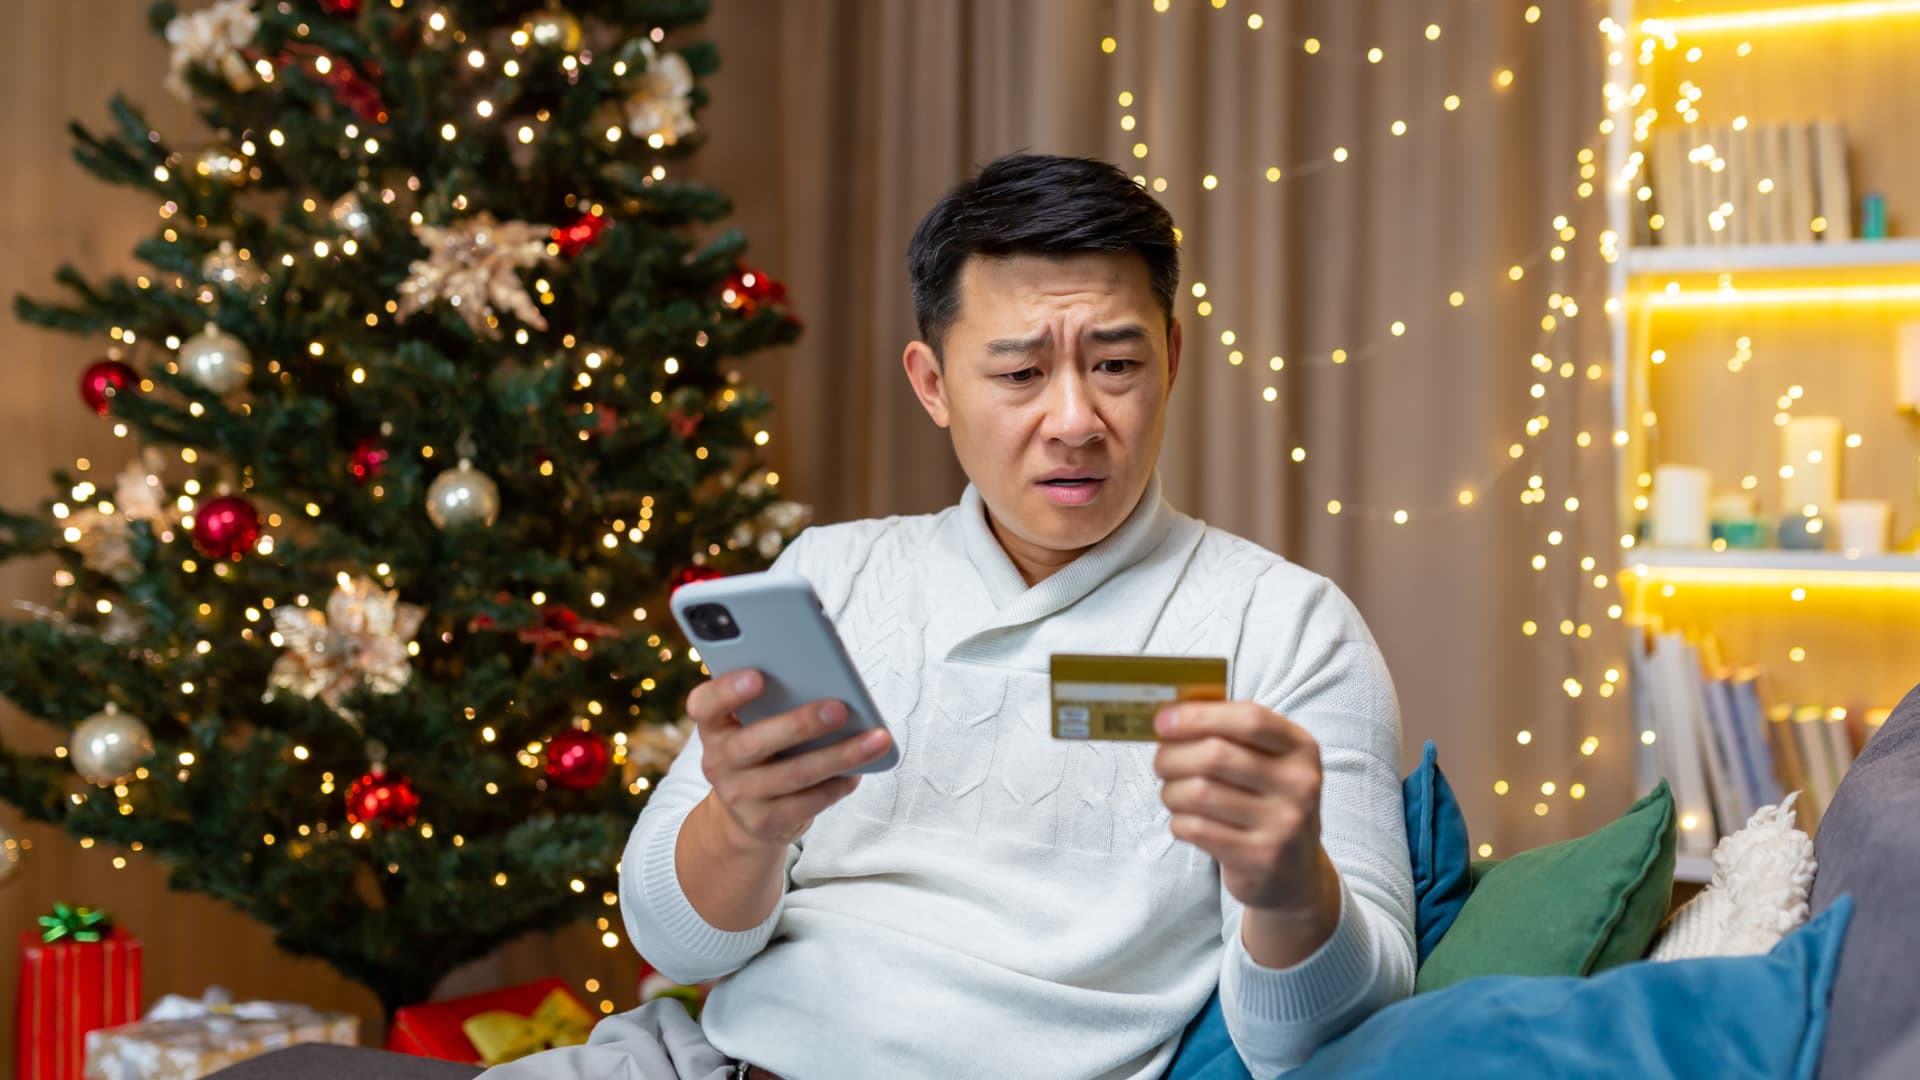 How to avoid common Black Friday, Cyber Monday shopping scams